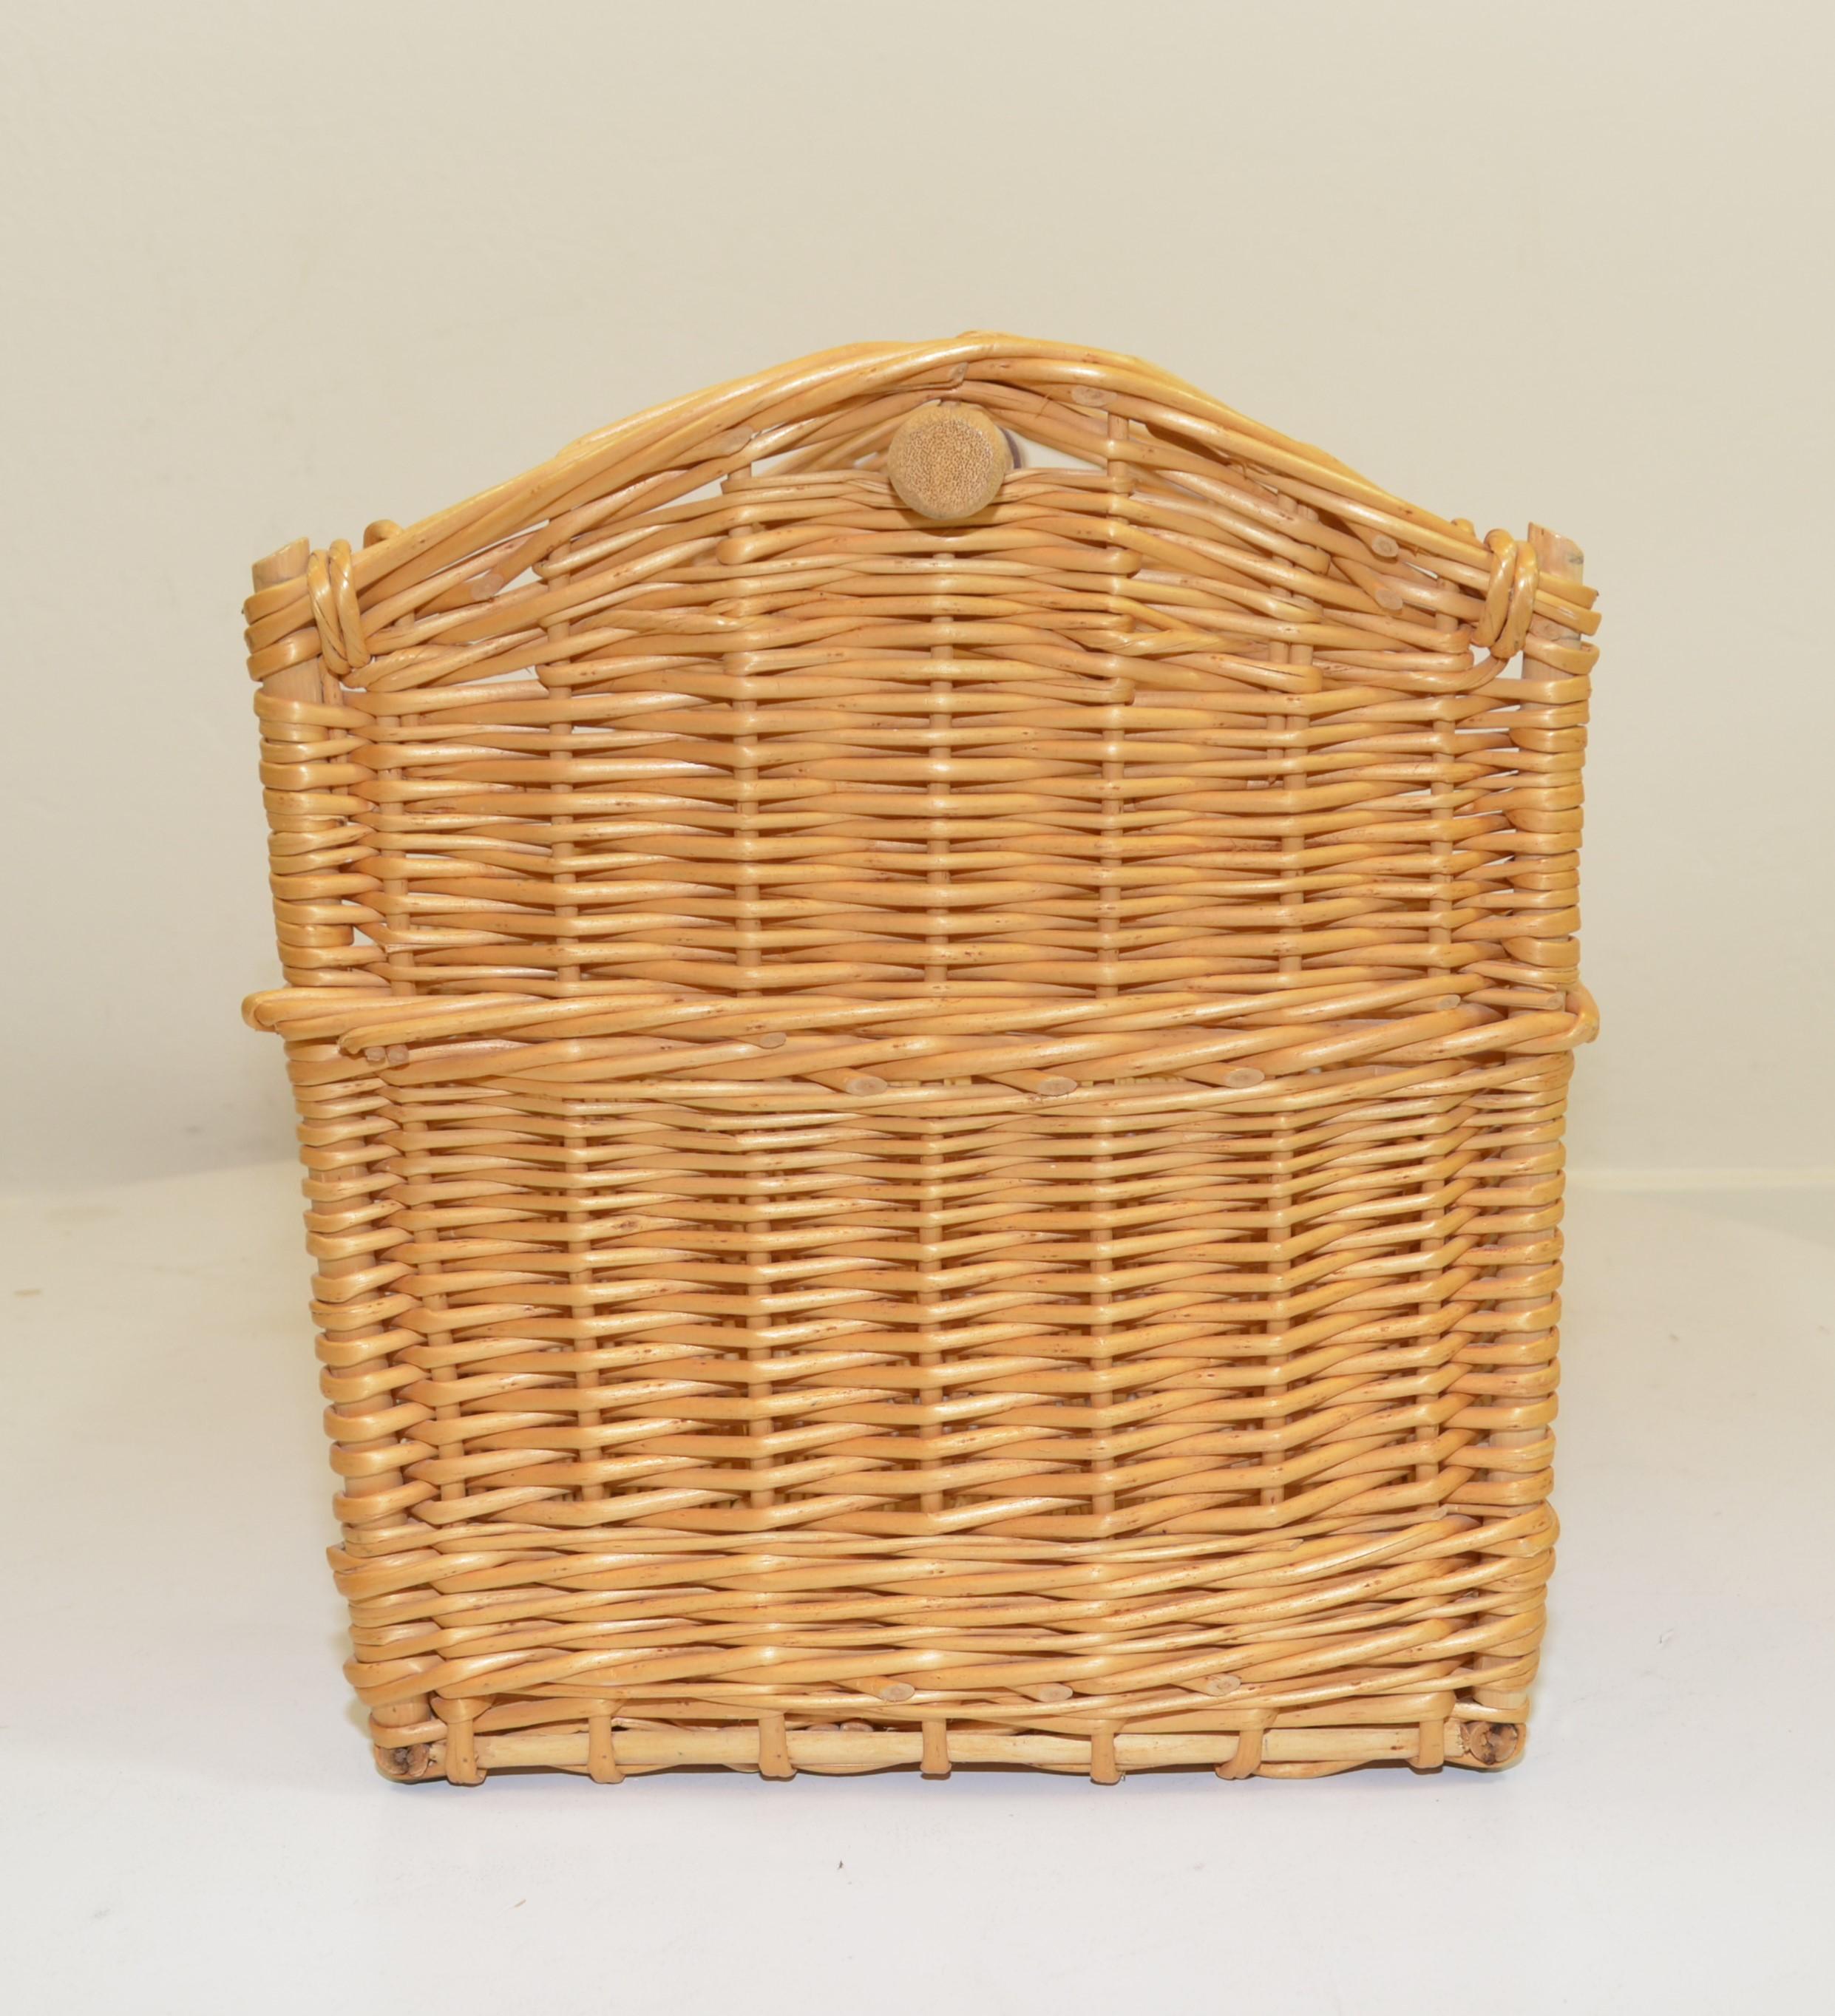 1980's wicker basket by Hermes featuring leather trimming and top handle with gold-tone stamped grommets. Originally a Grooming Box but would make a lovely gathering or picnic basket. Excellent unused vintage condition with no major flaws or visible